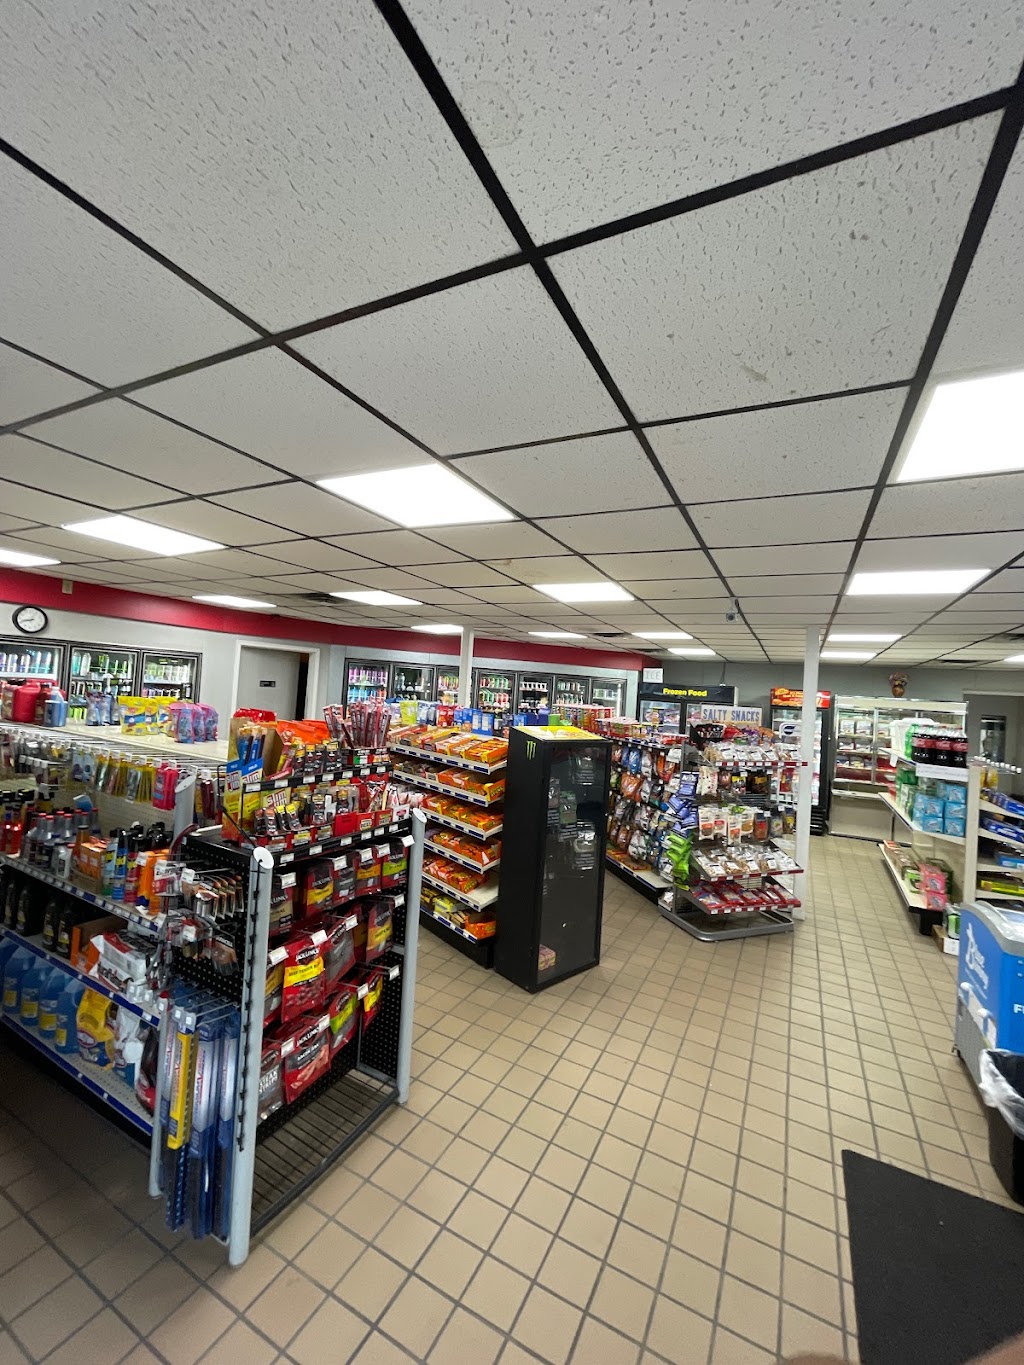 New Hope Fuel & Wash | 9400 49th Ave N, Minneapolis, MN 55428, USA | Phone: (763) 533-9414